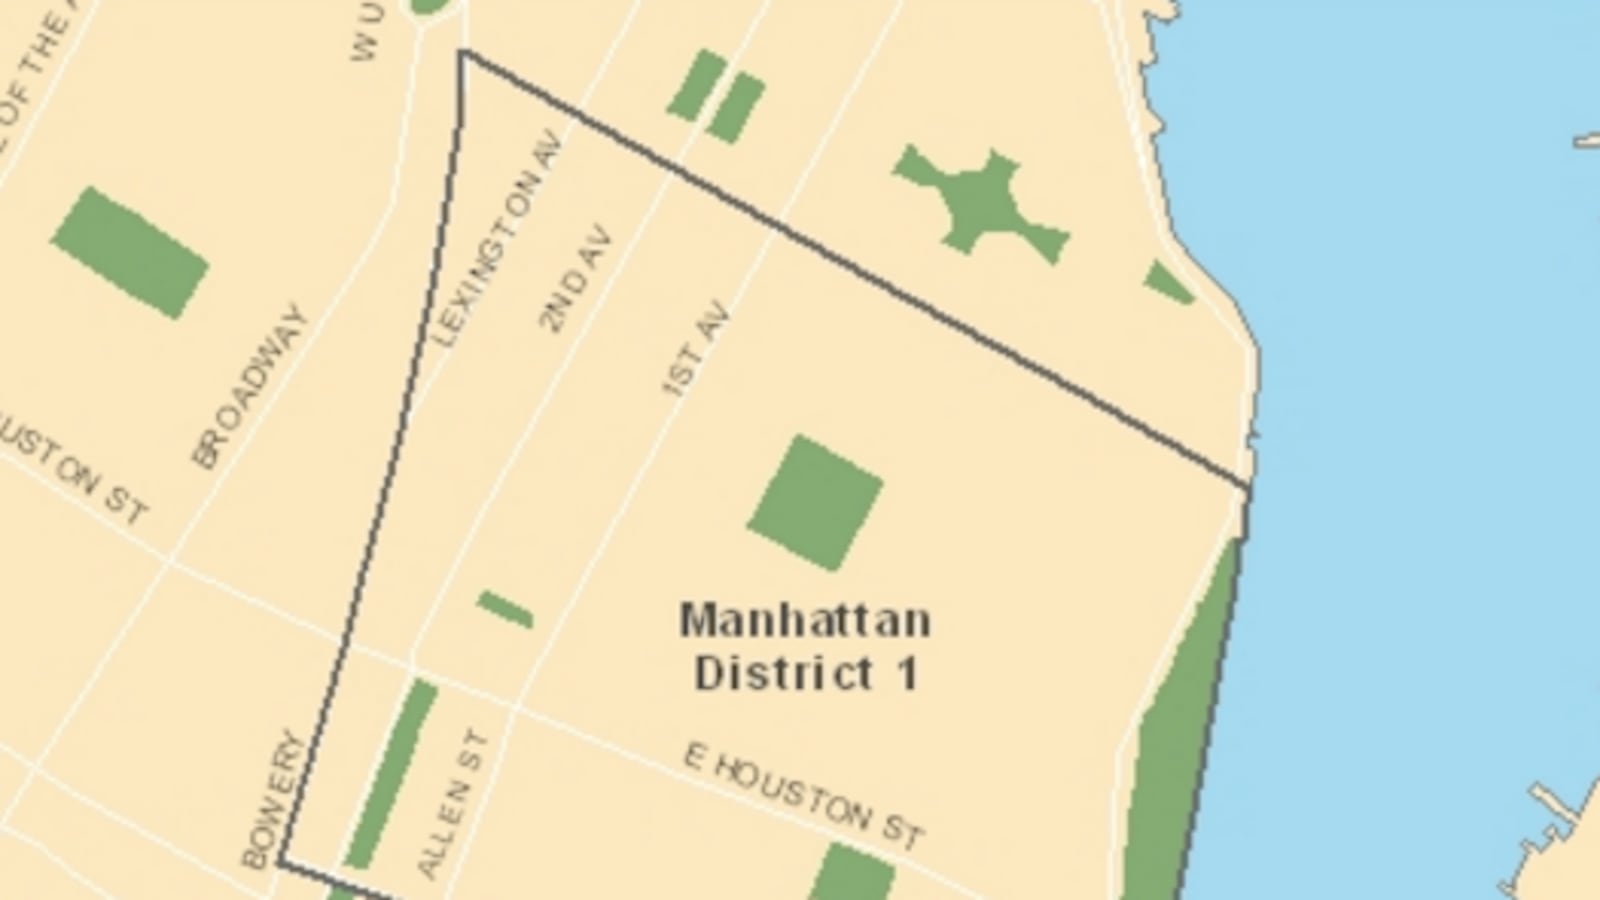 District 1 includes the Lower East Side. (Photo credit: New York City Department of Education)